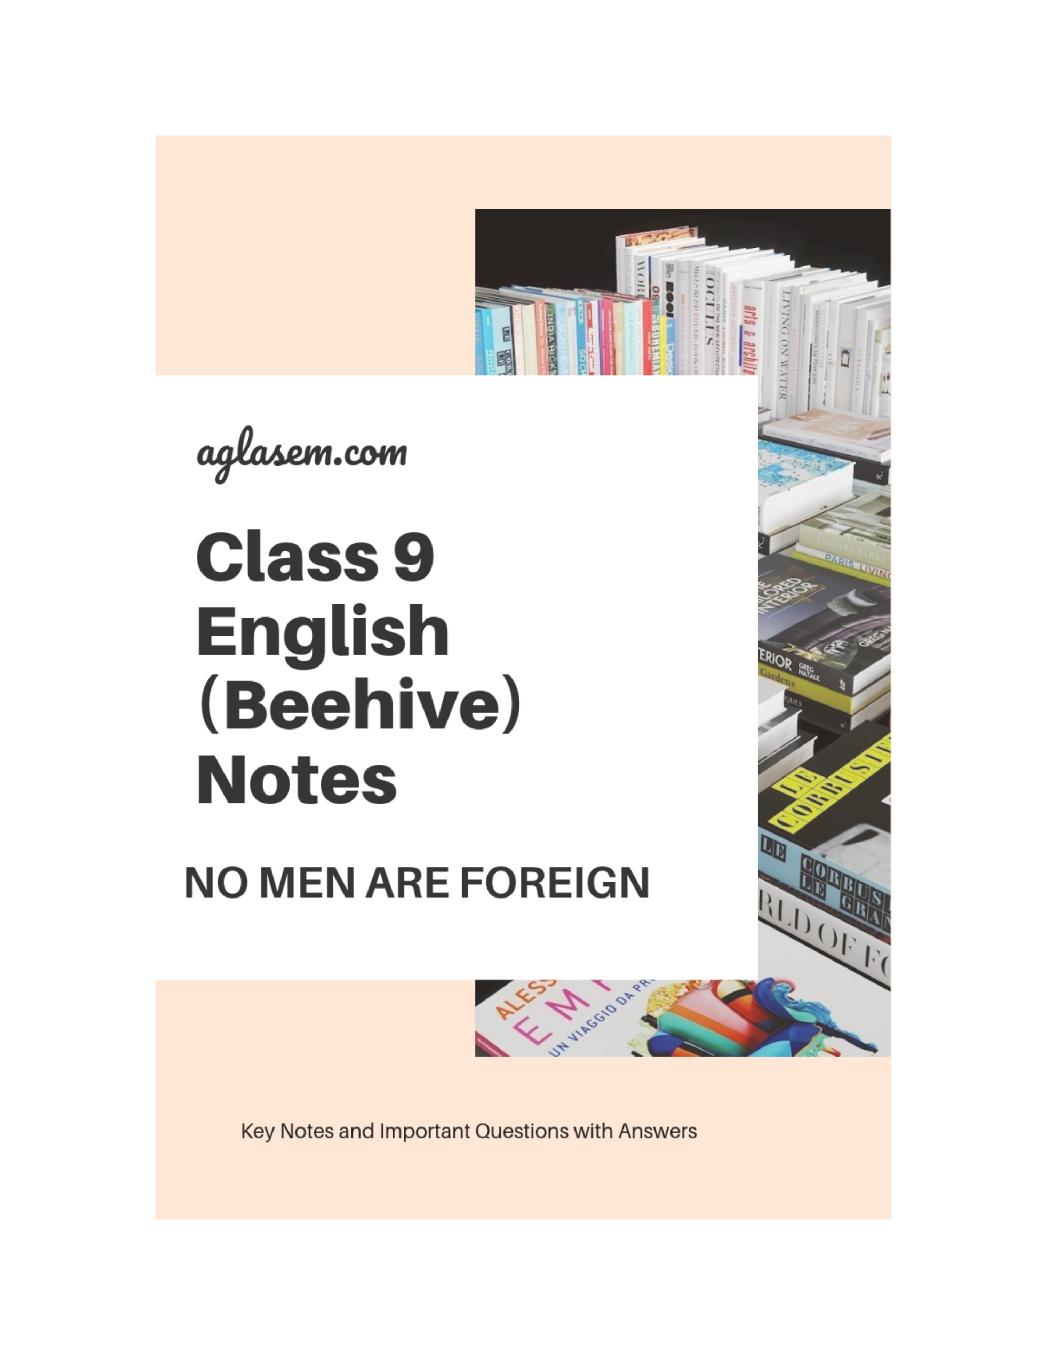 Class 9 English Beehive Notes For No Men are Foreign - Page 1